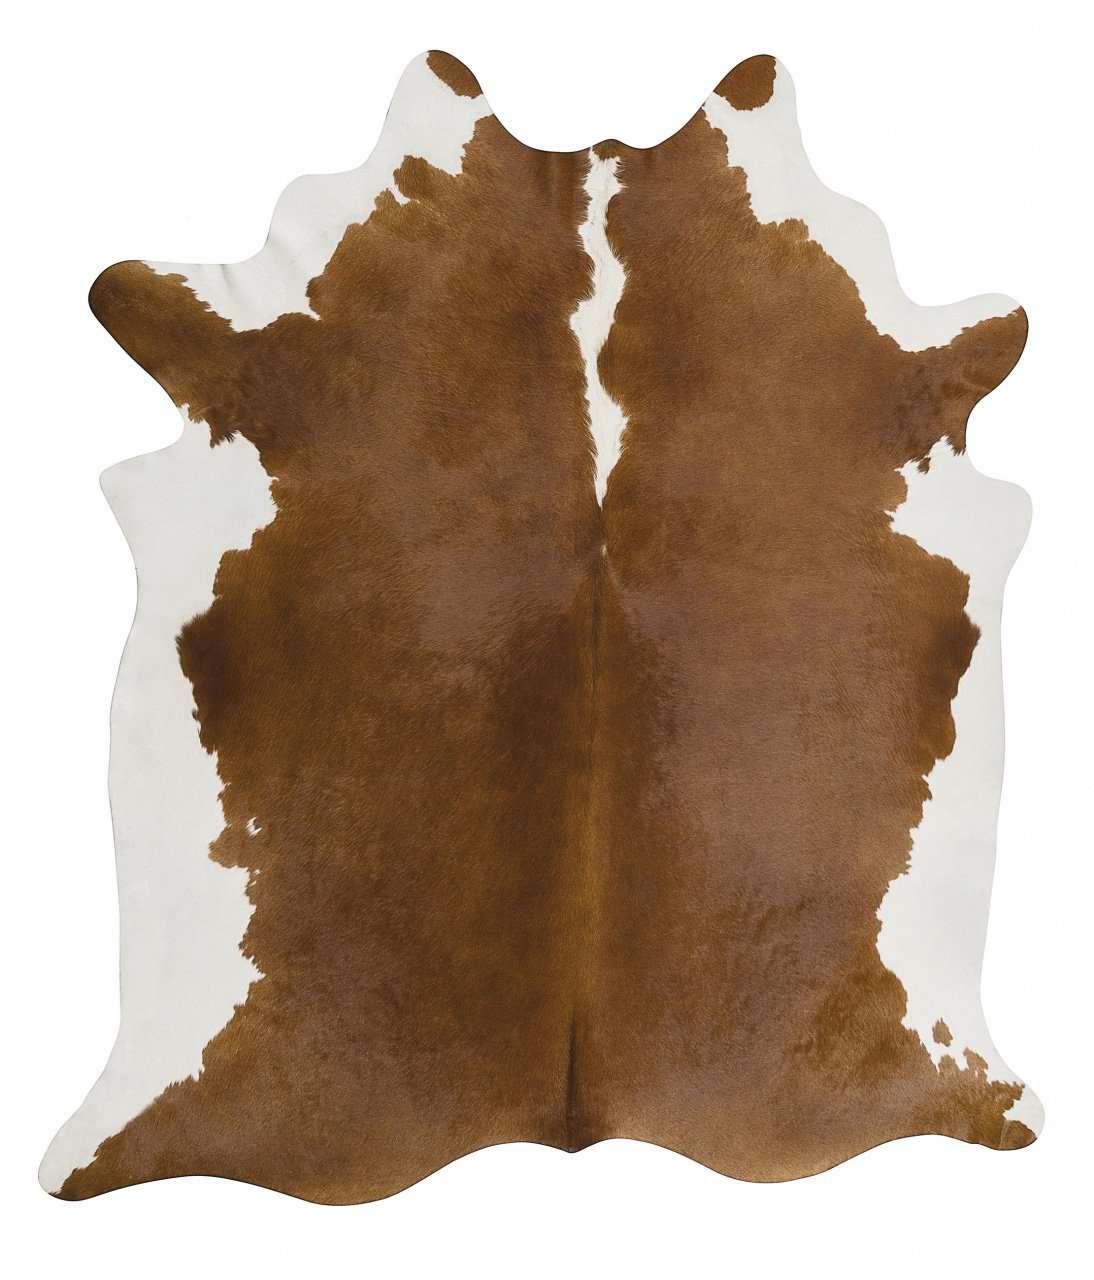 Rug Culture RUGS 170x120cm Cow Hide - Hereford